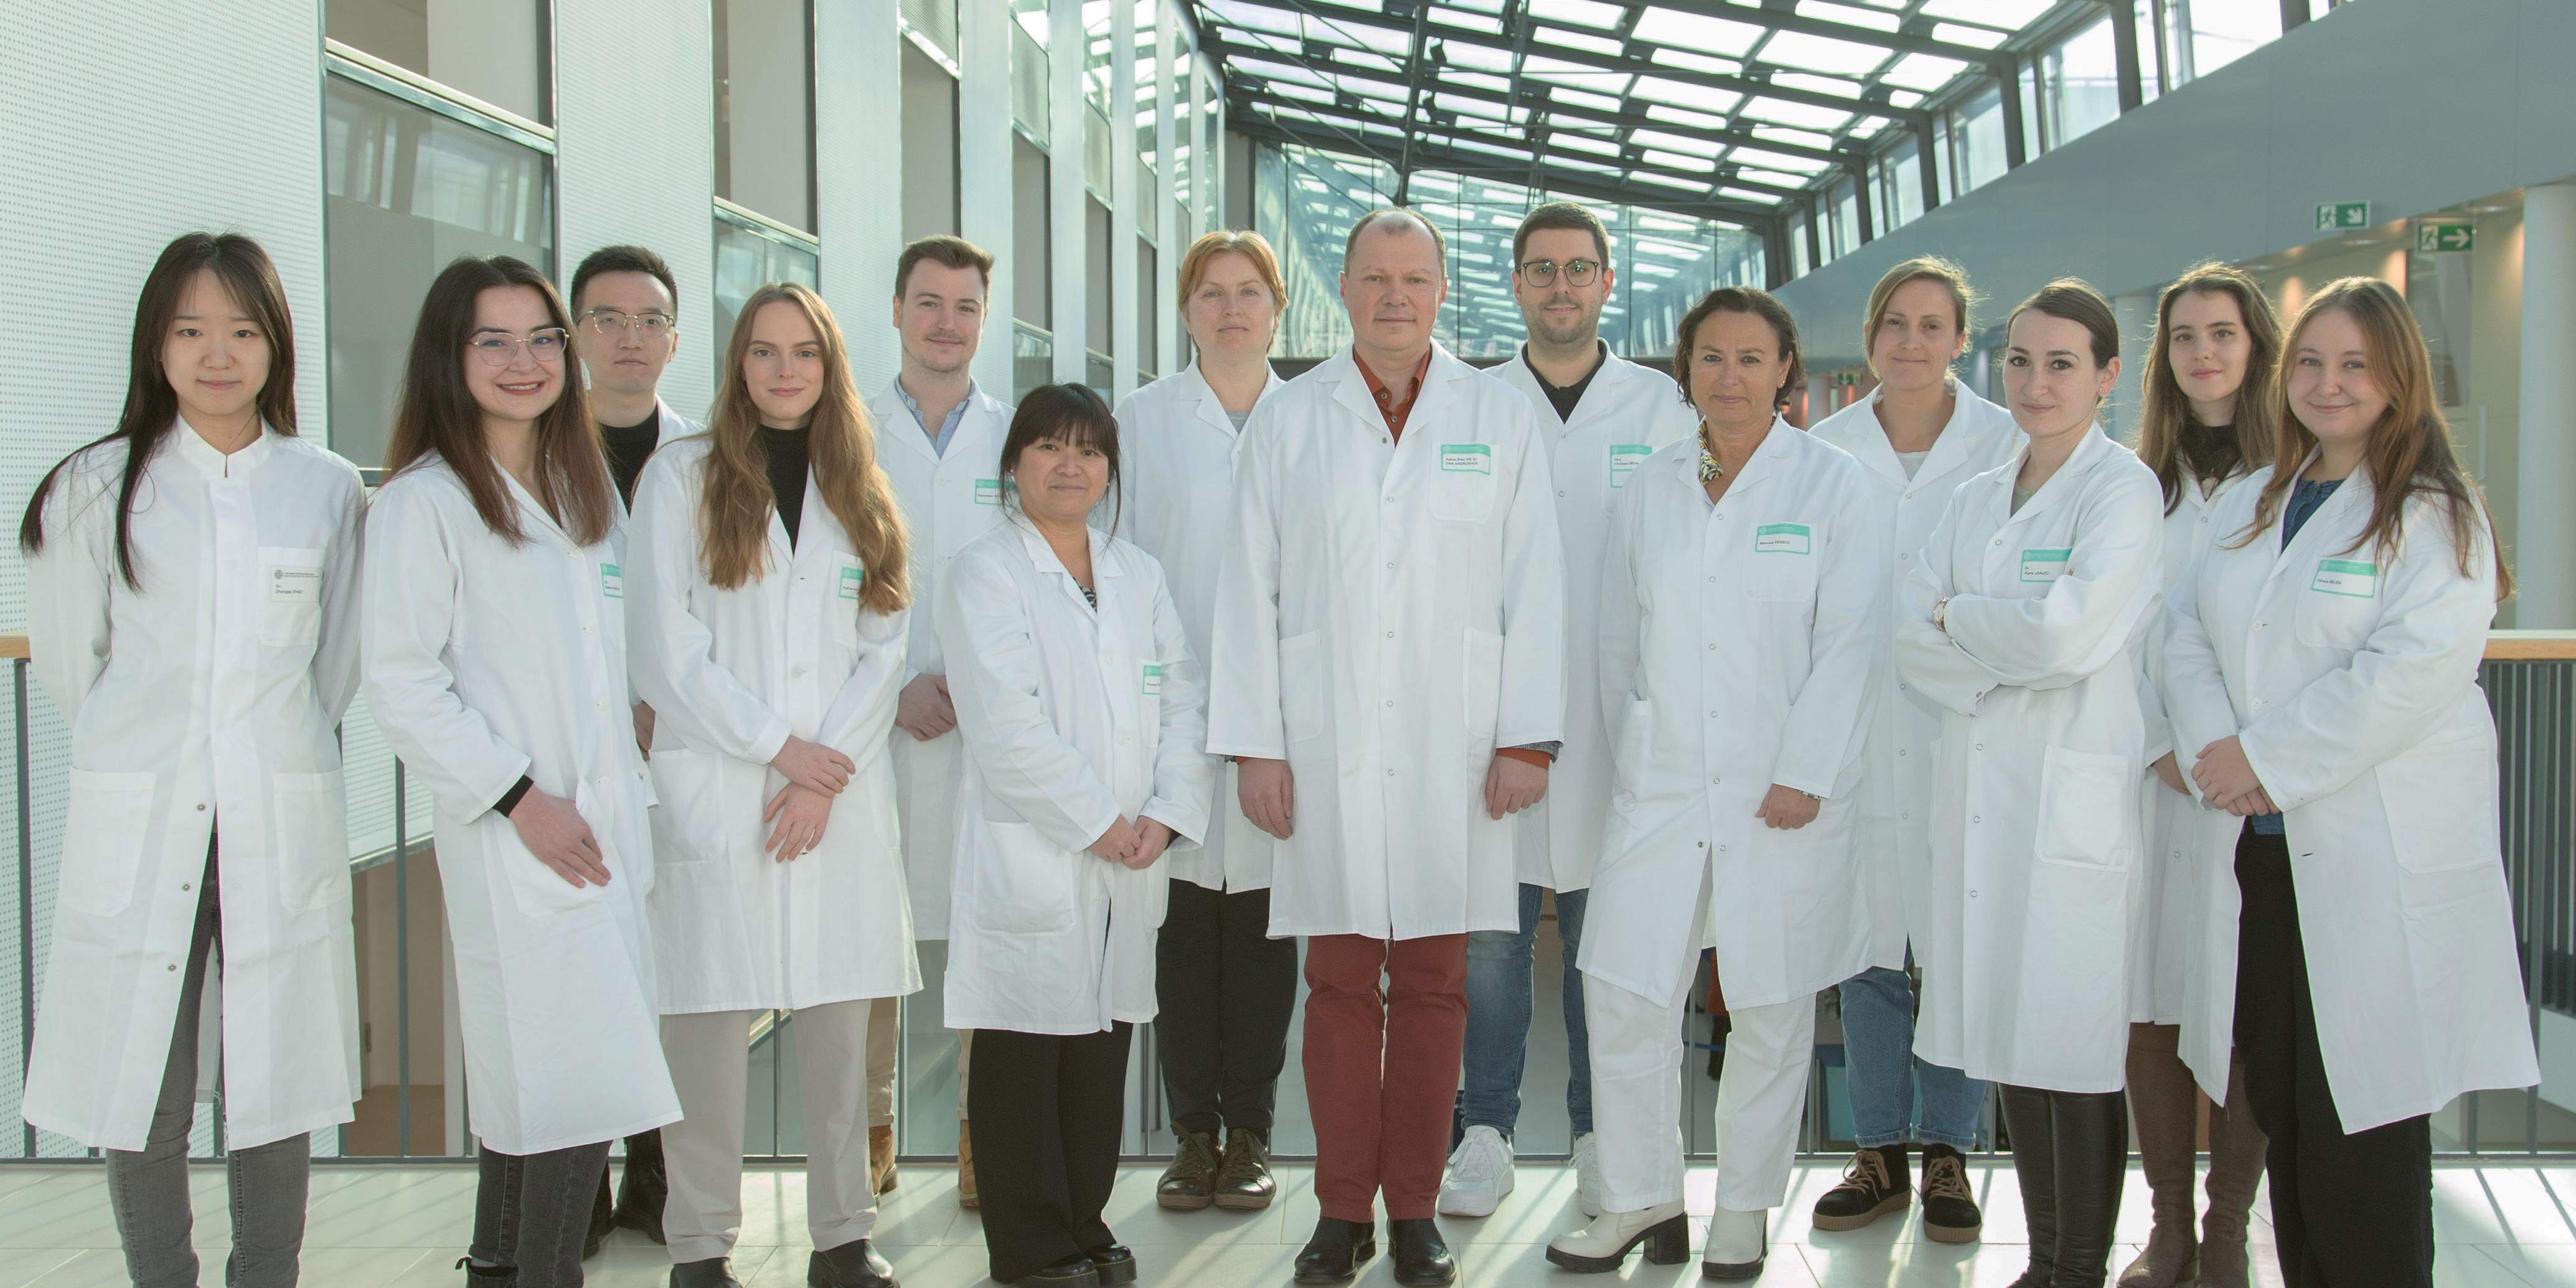 The research team at the Competence Center Periodontal Research